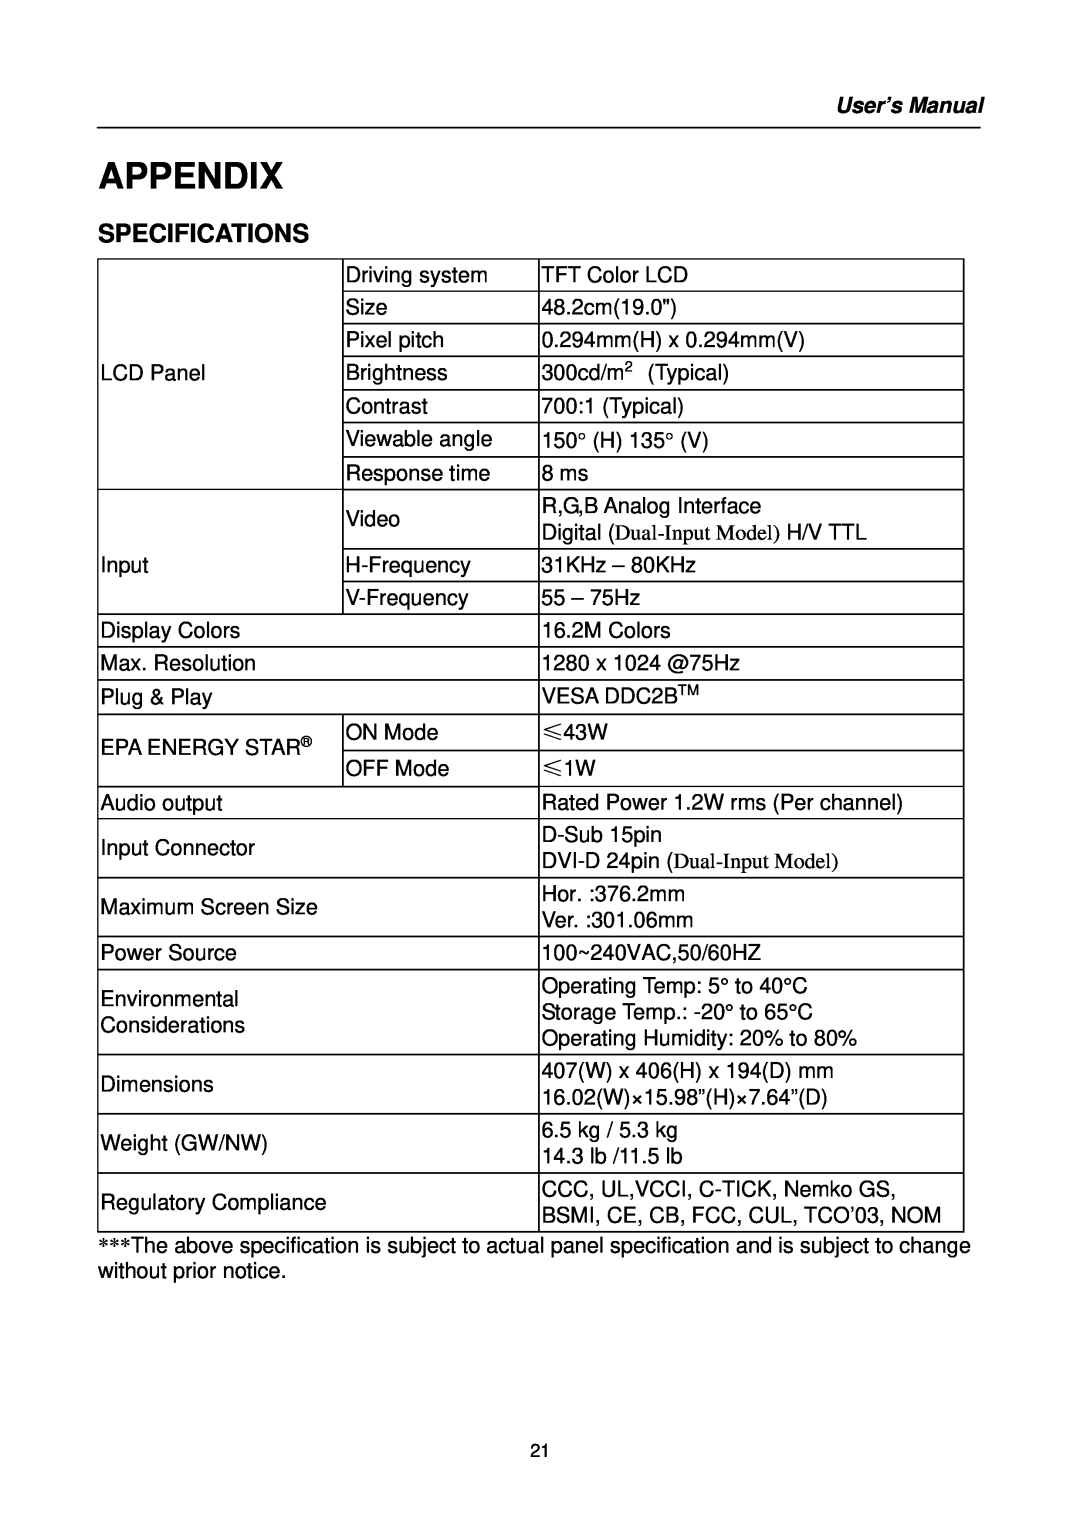 Hanns.G HS191 user manual Appendix, Specifications, User’s Manual 